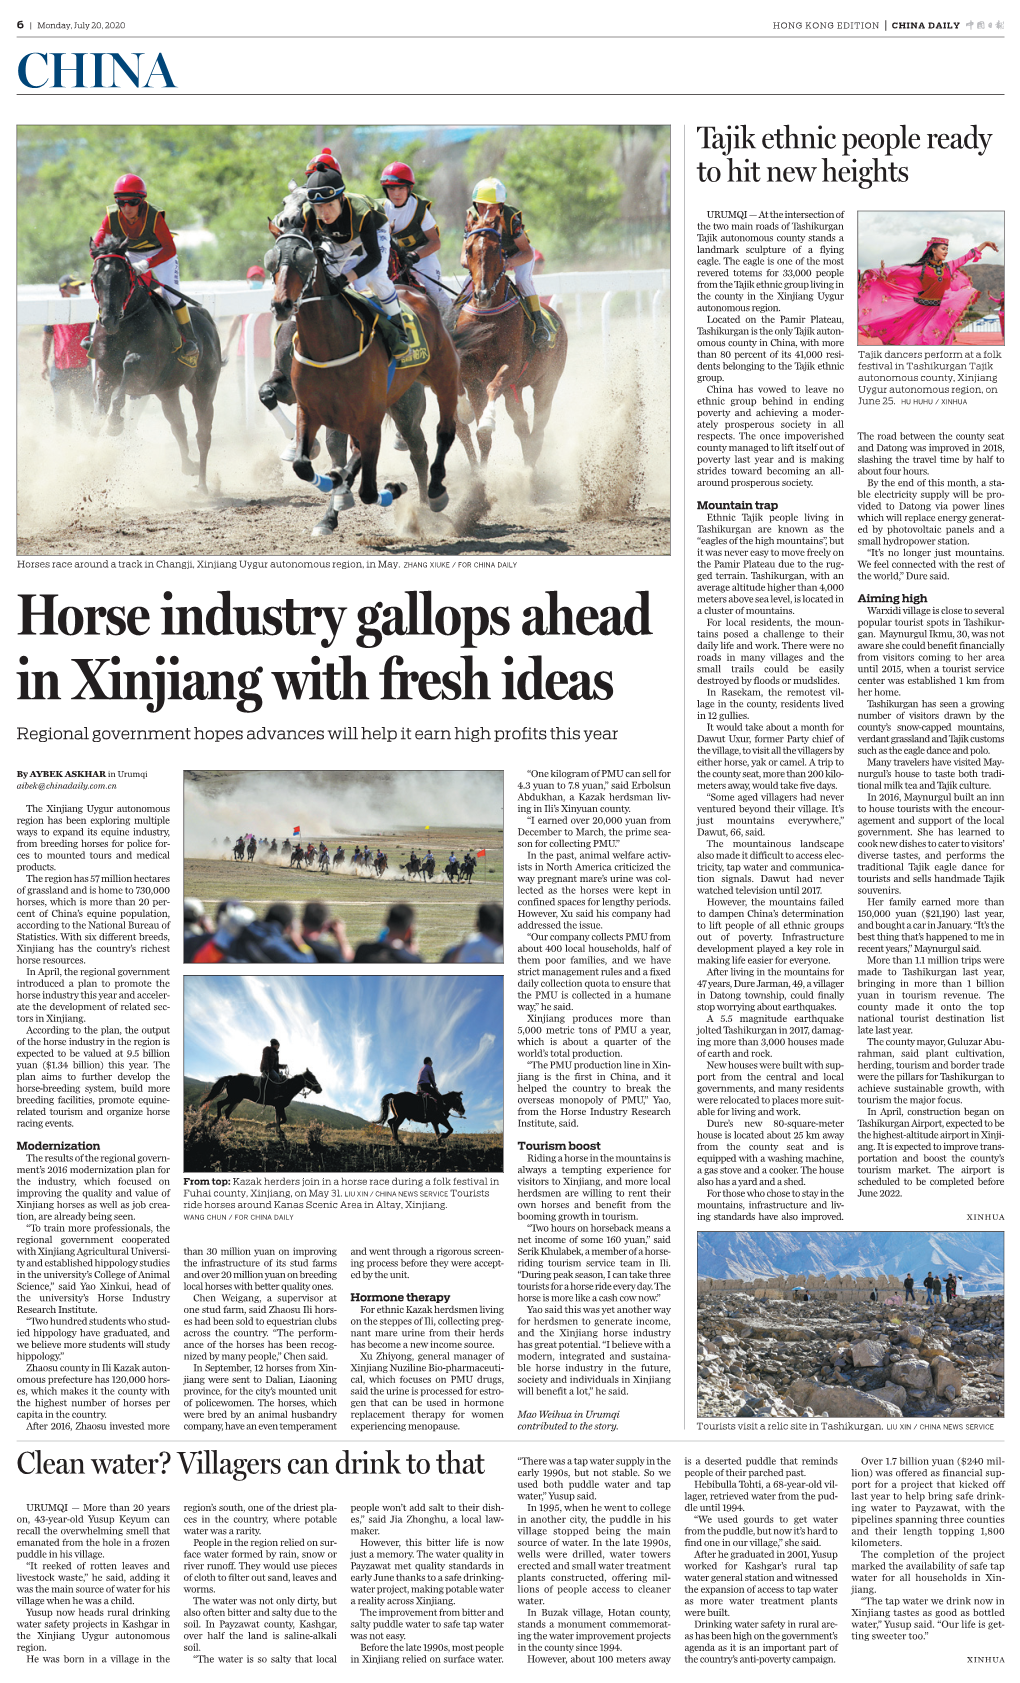 Horse Industry Gallops Ahead in Xinjiang with Fresh Ideas